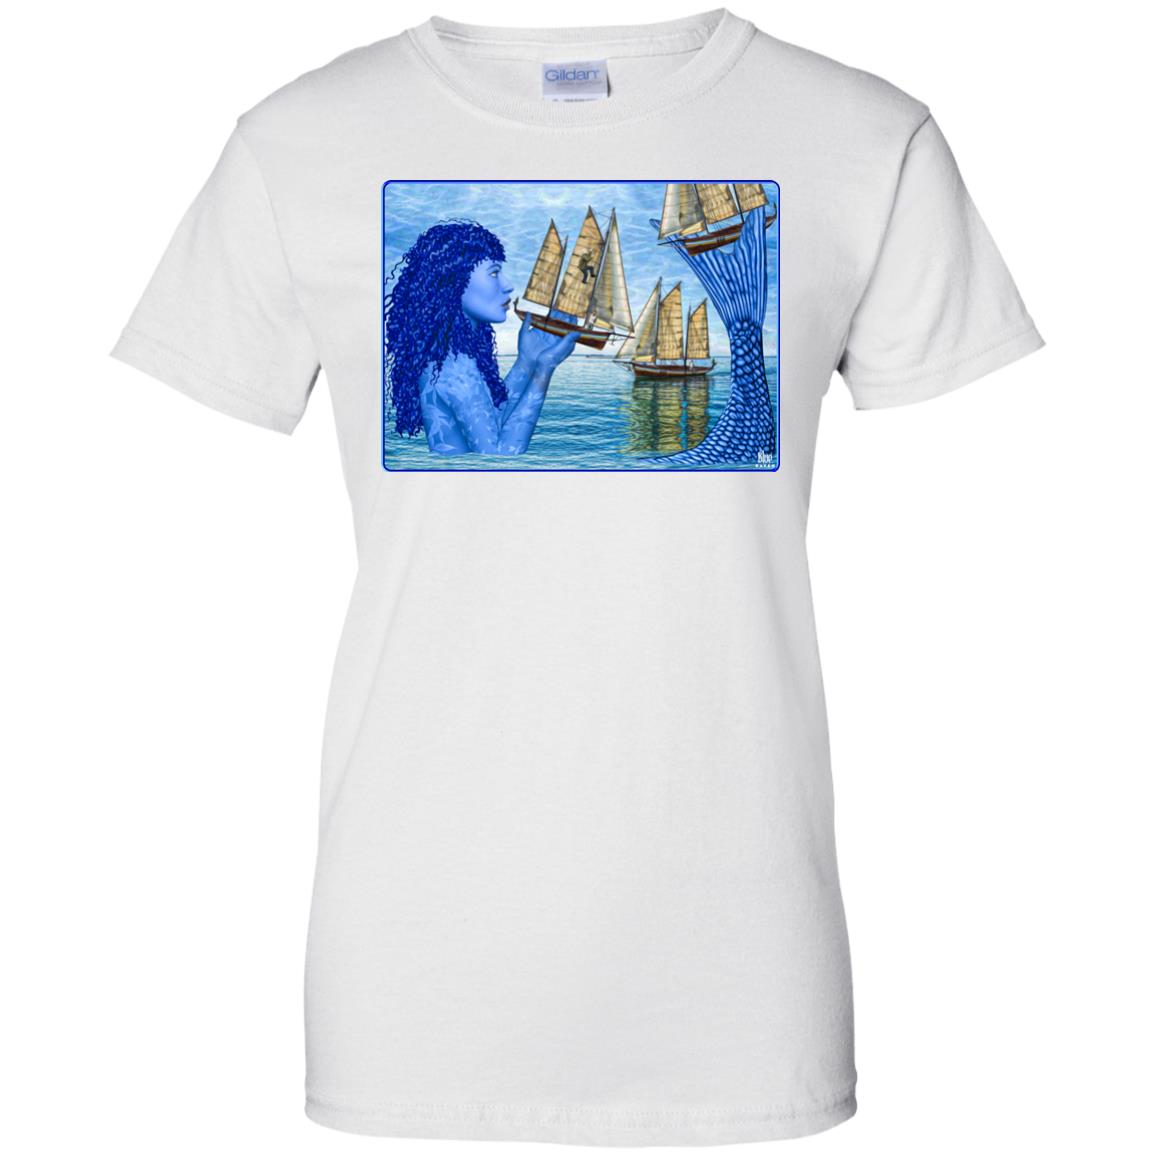 I Saw Three Ships - Women's Relaxed Fit T-Shirt